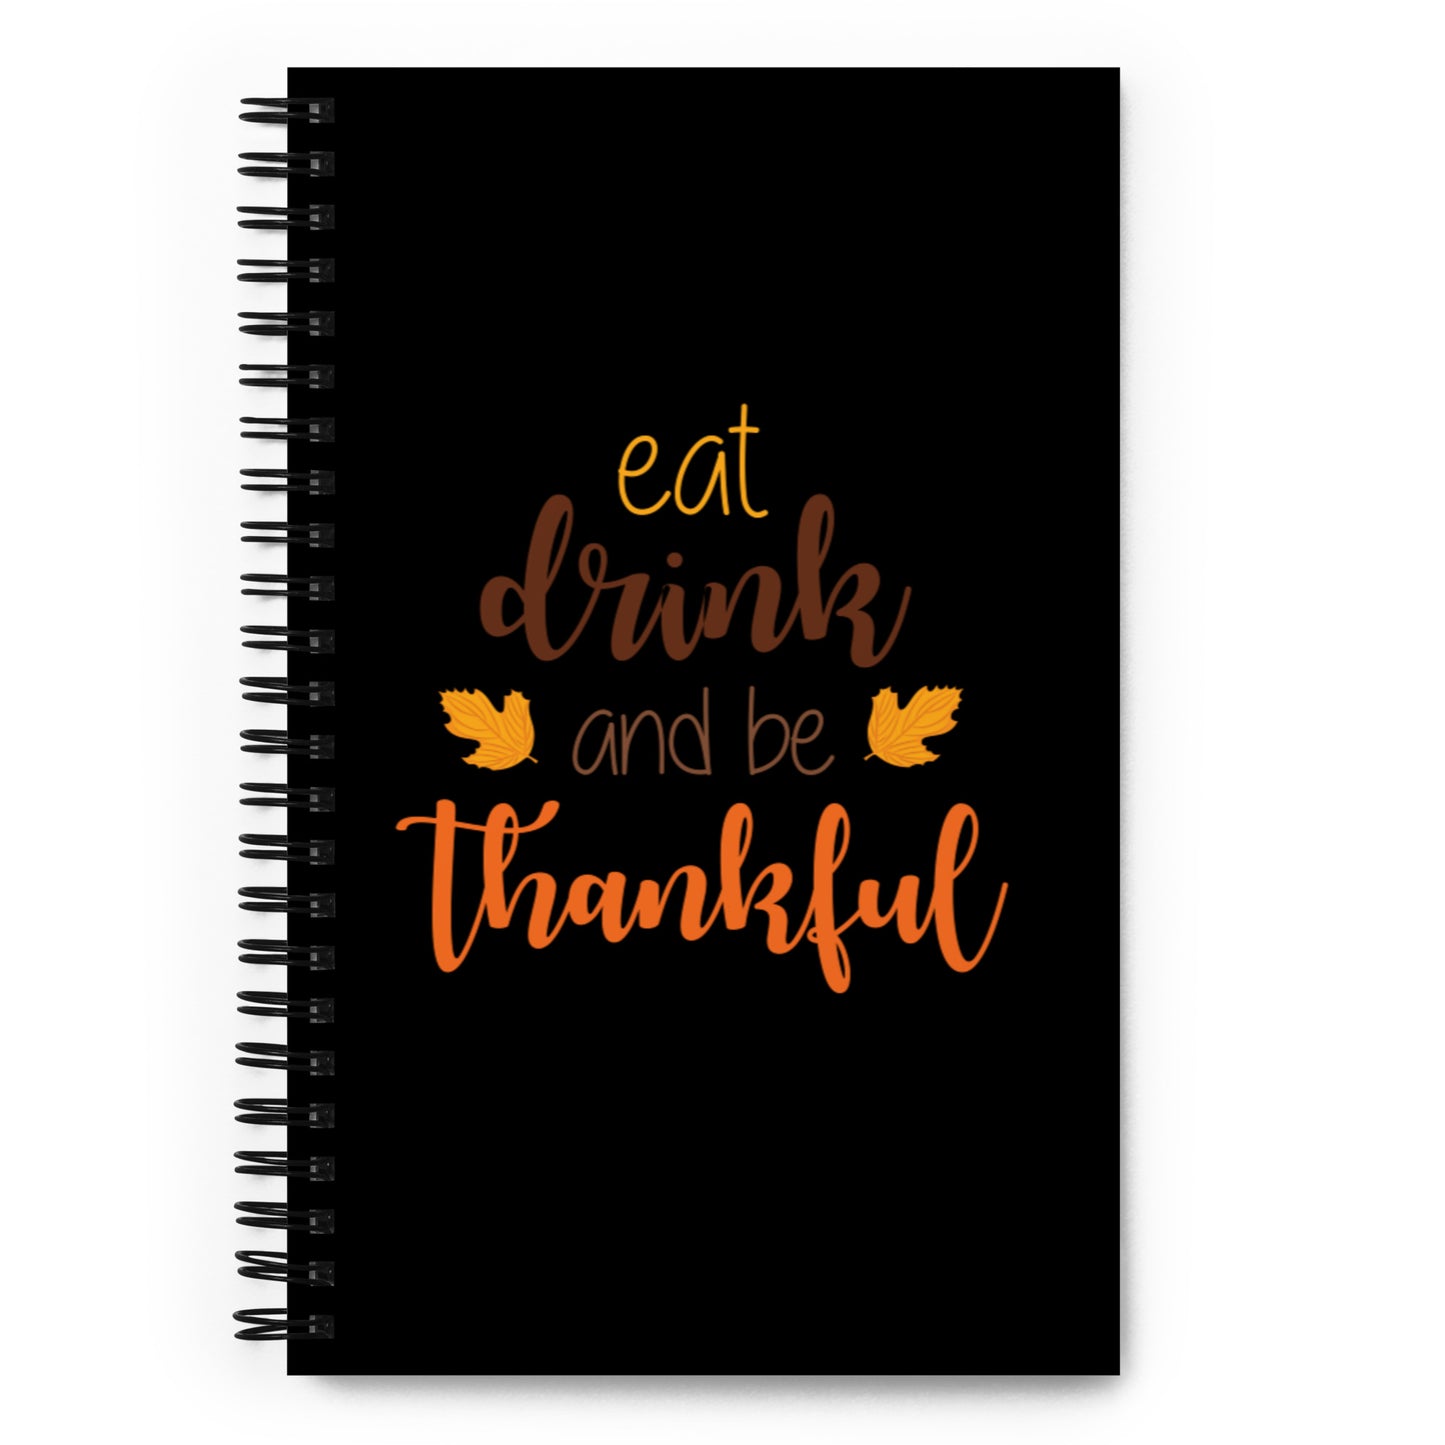 Eat Drink and be Thankful Spiral notebook